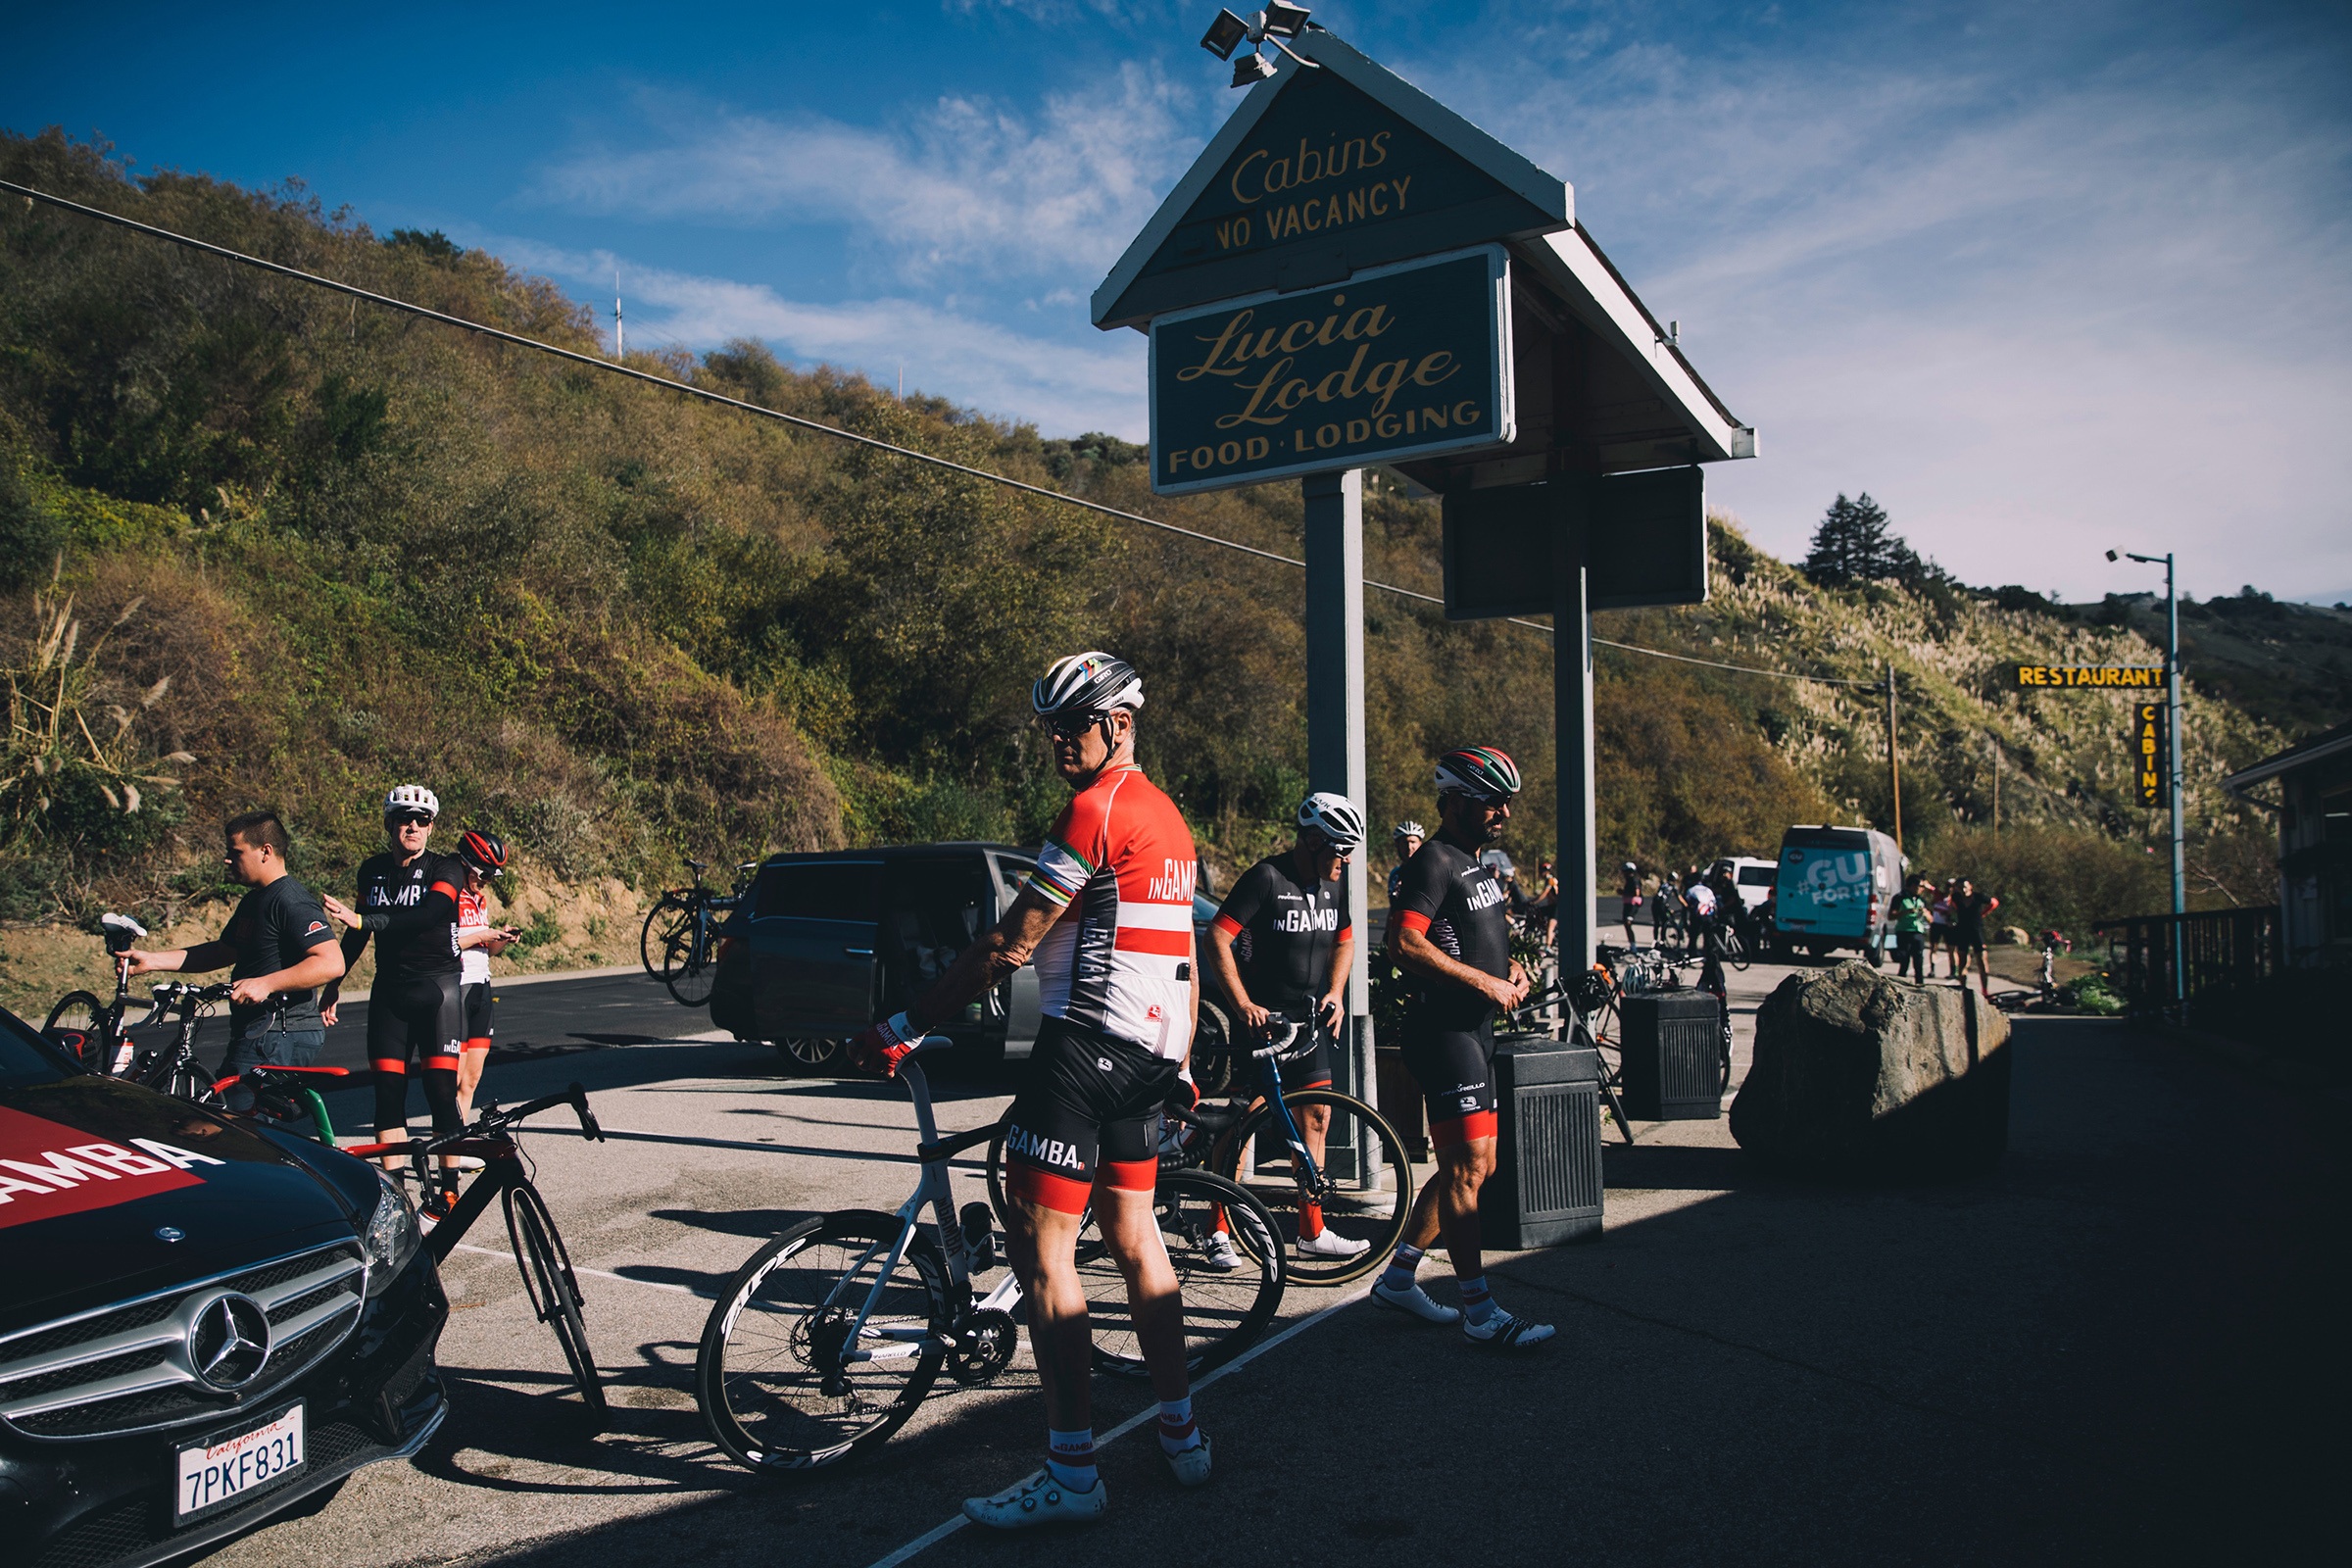 Day 2 of the 2018 Coast Ride